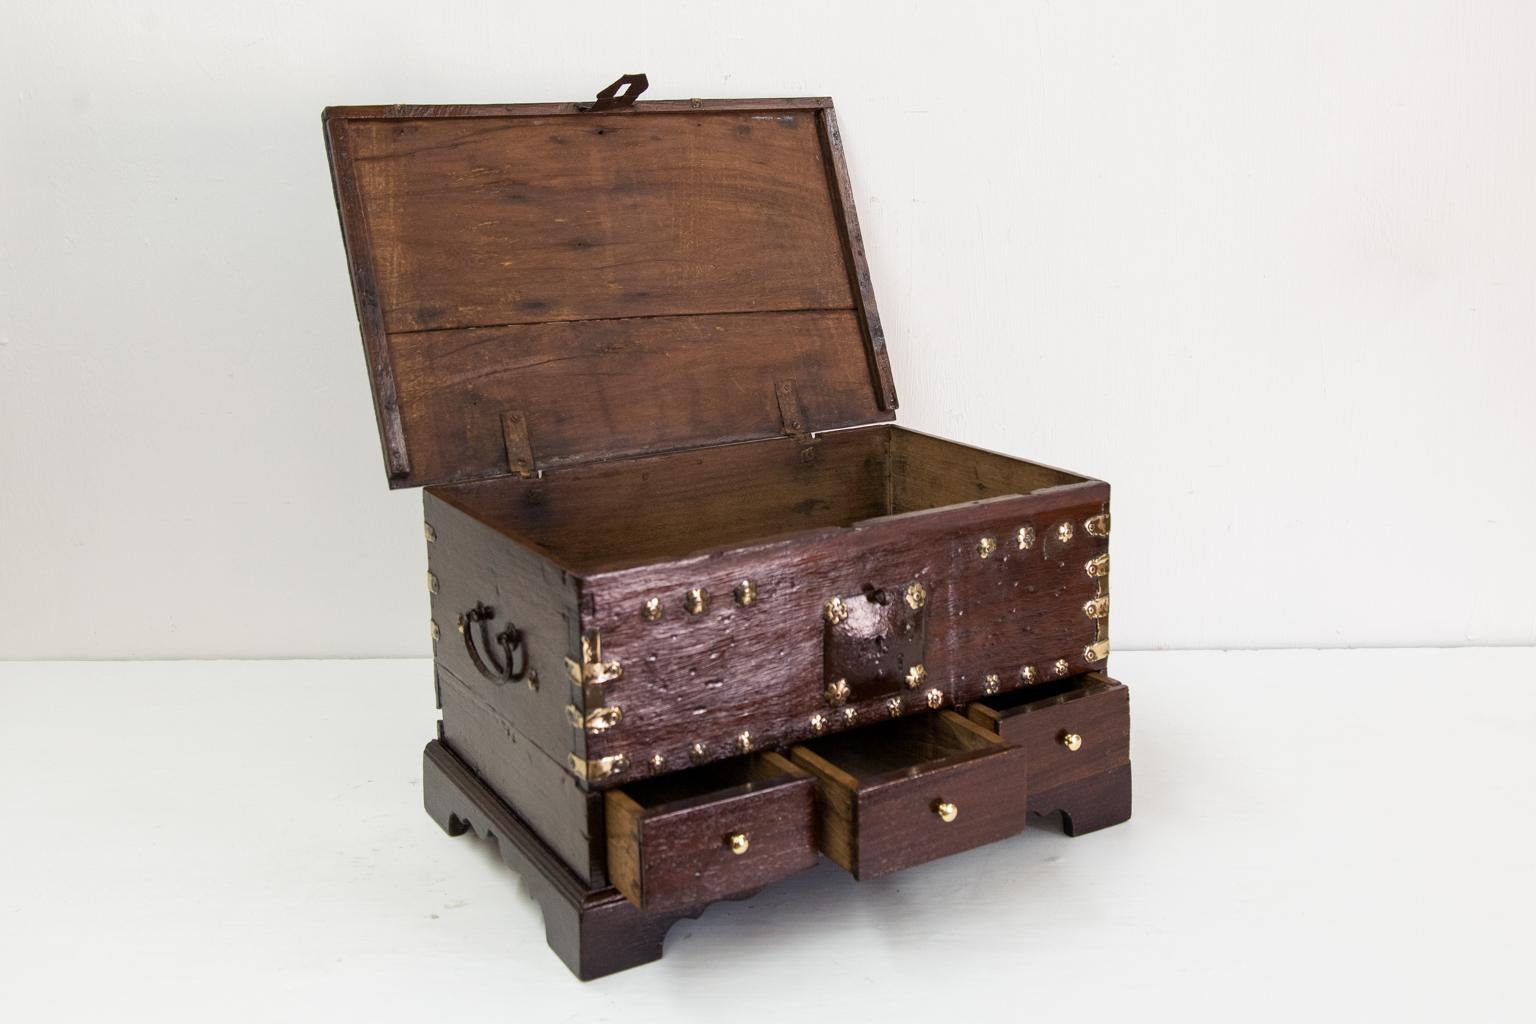 Three-drawer brass bound chest, with the original steel hasp and carrying handles, with brass bound corners and decorative brass stud work on the front.